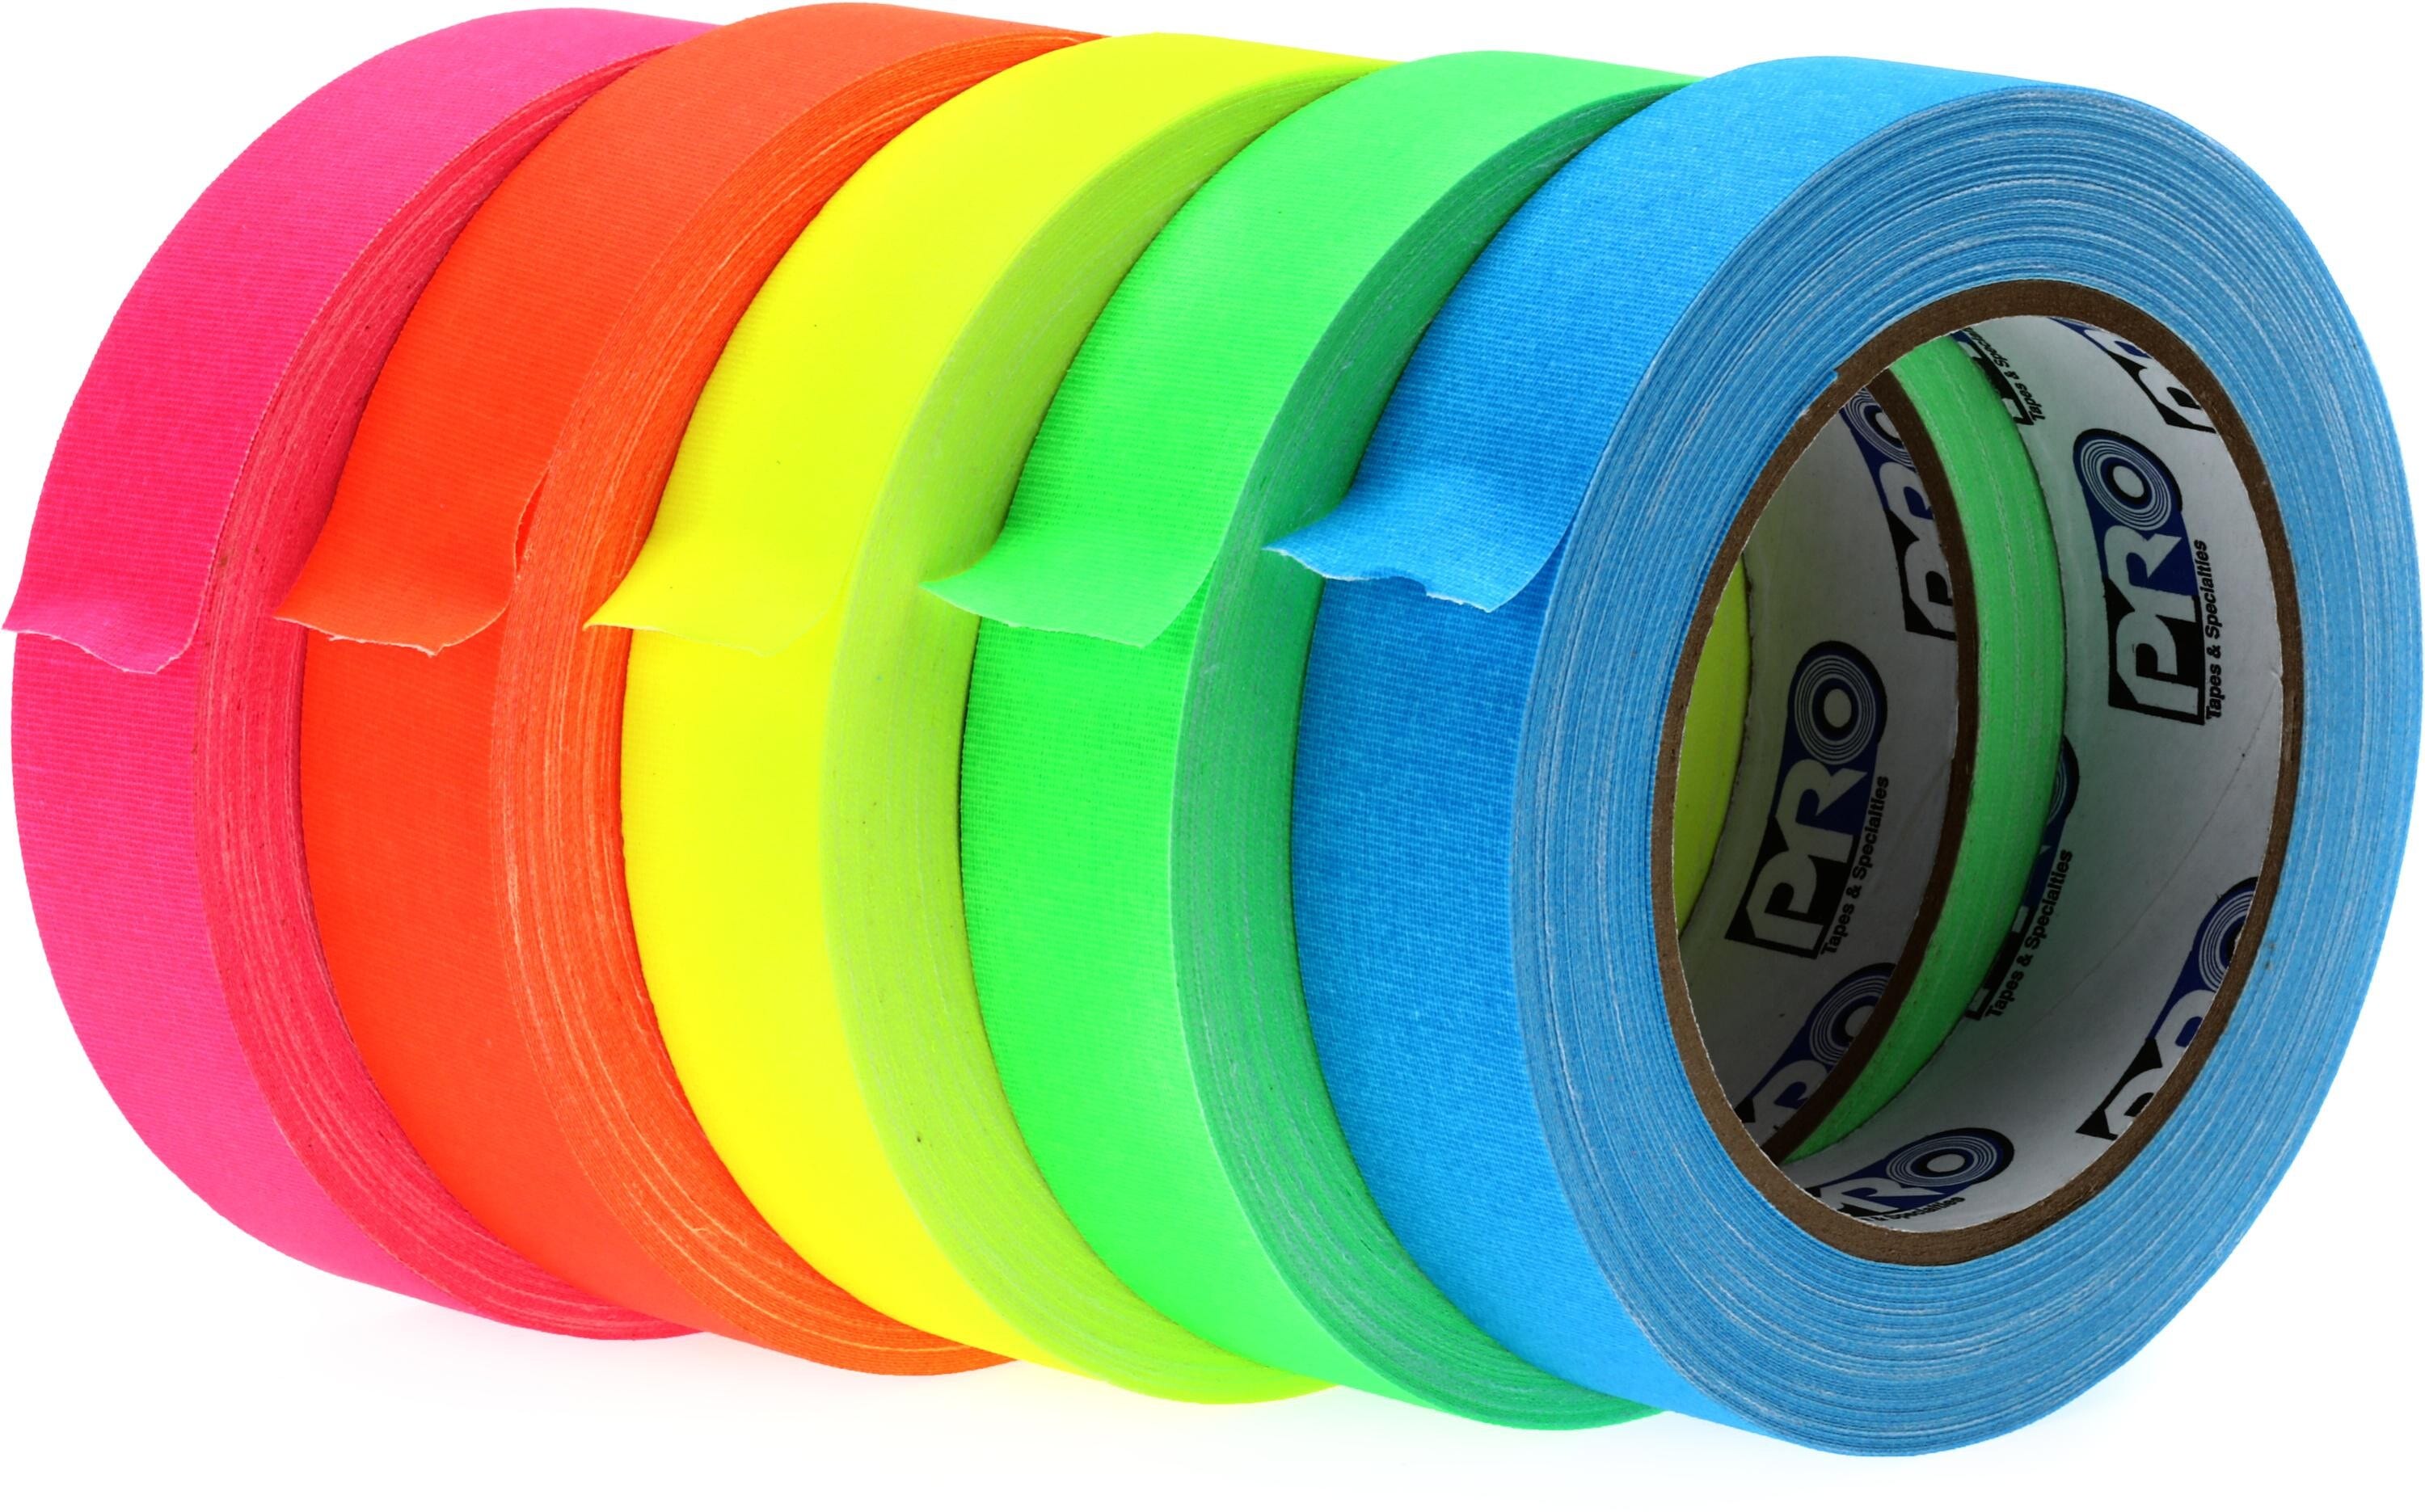 Pro Tapes Pro-Spike Spike Tape: 1/2 in x 45 yds. (Fluorescent